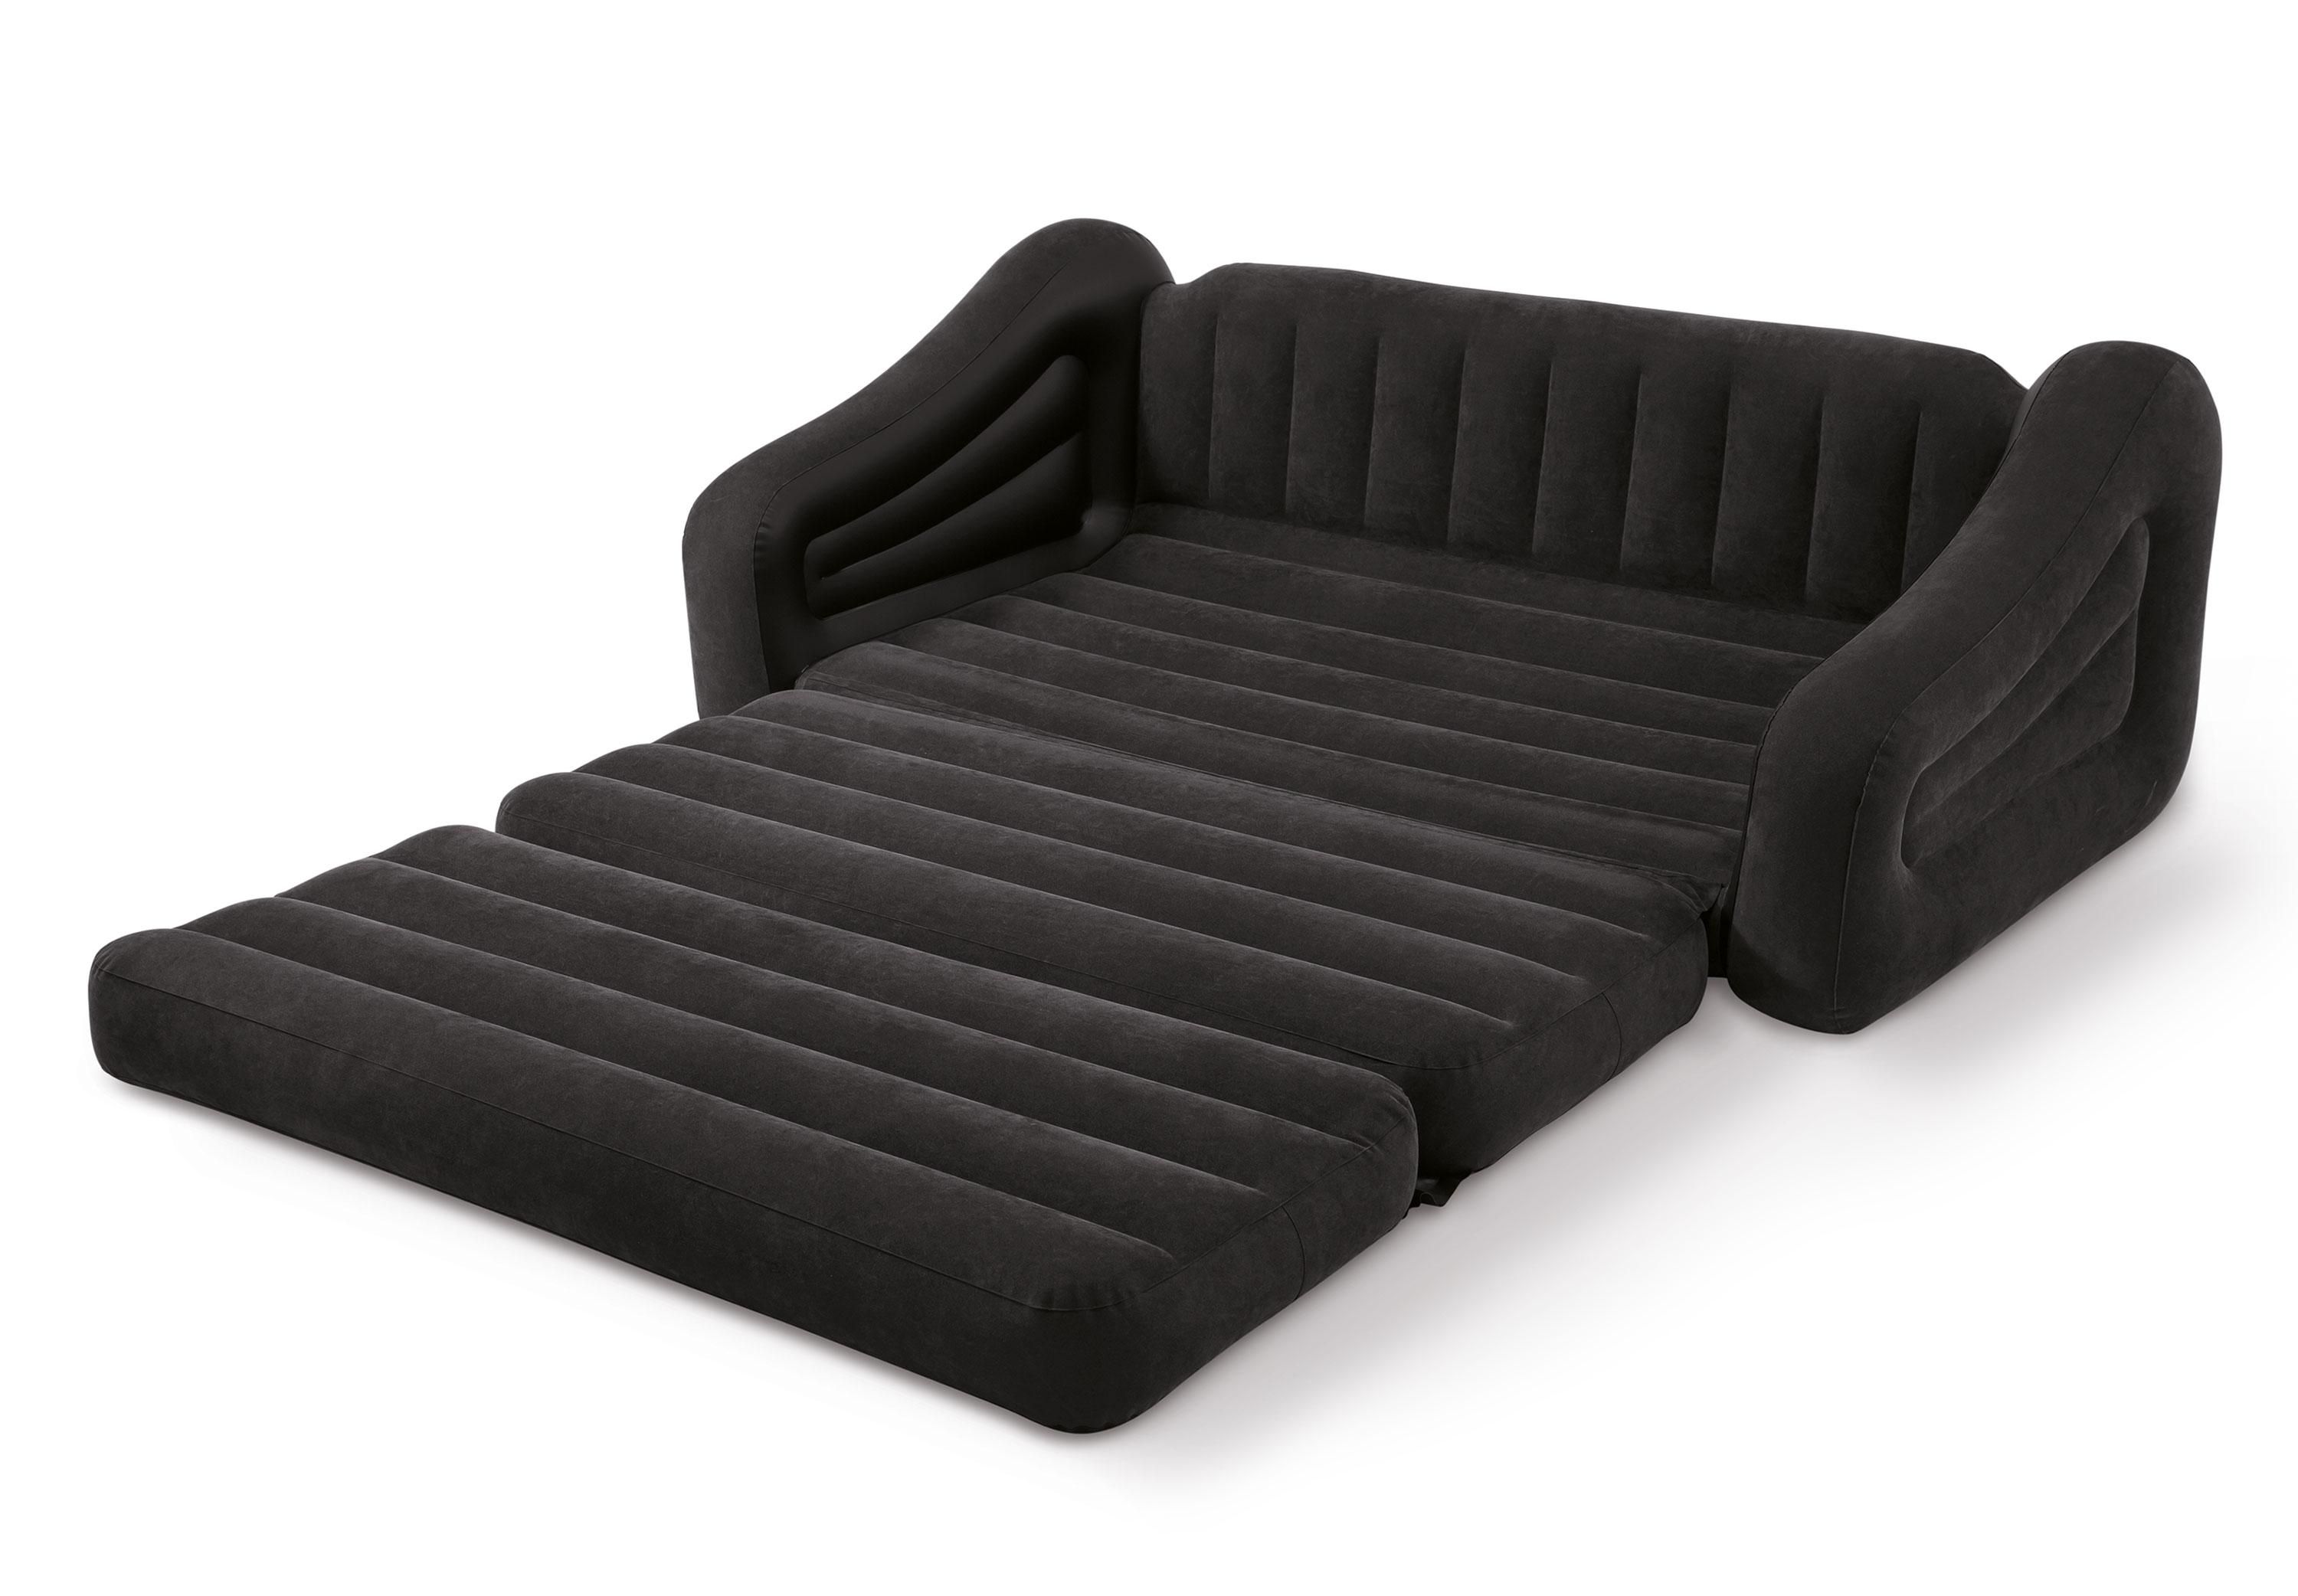 Intex Inflatable Pull Out Sofa Queen Bed Sleeper 68566Ep + 66619E Inside Intex Inflatable Pull Out Sofas (View 2 of 20)